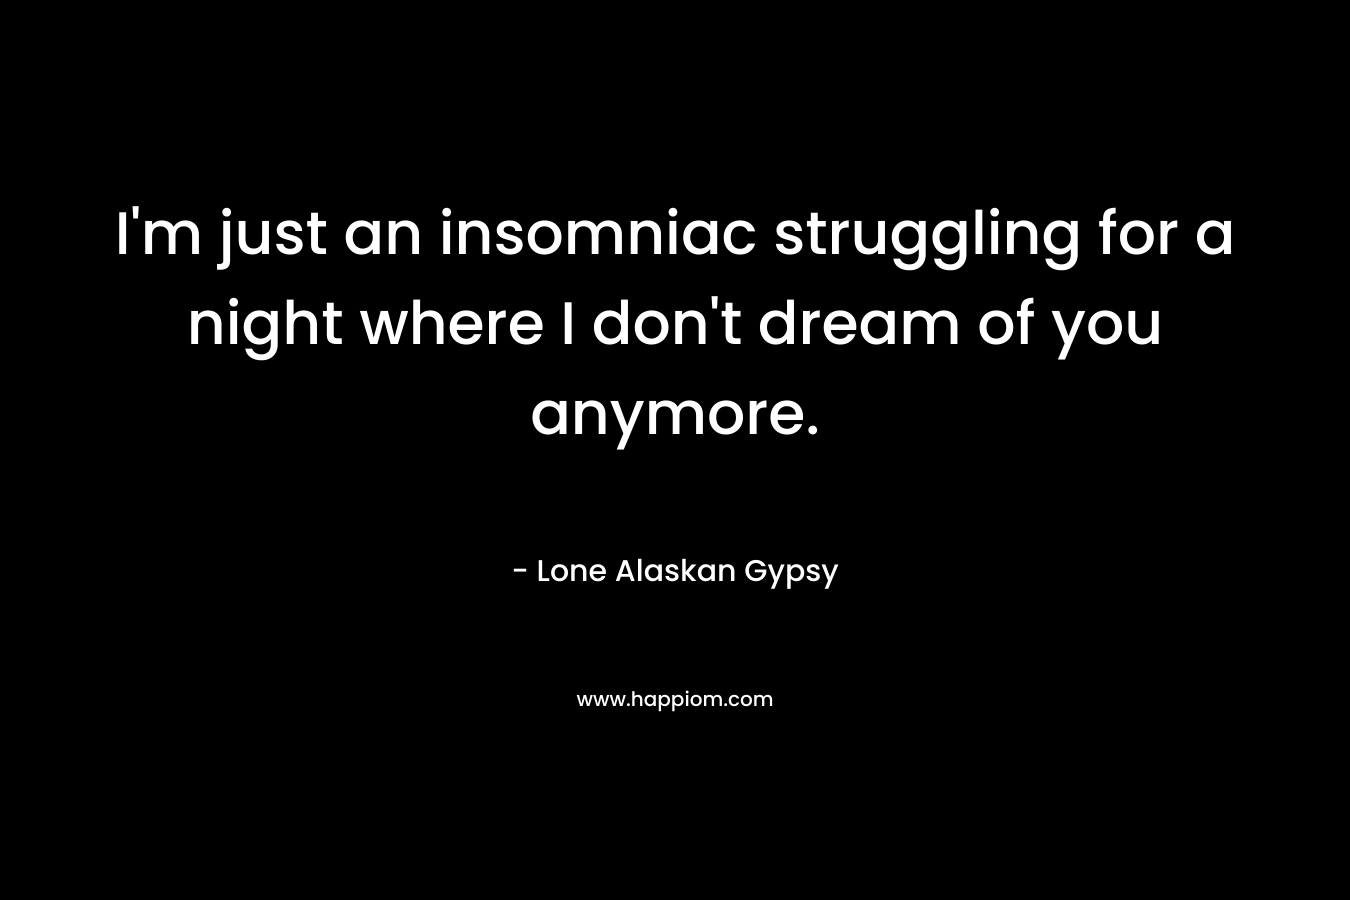 I’m just an insomniac struggling for a night where I don’t dream of you anymore. – Lone Alaskan Gypsy